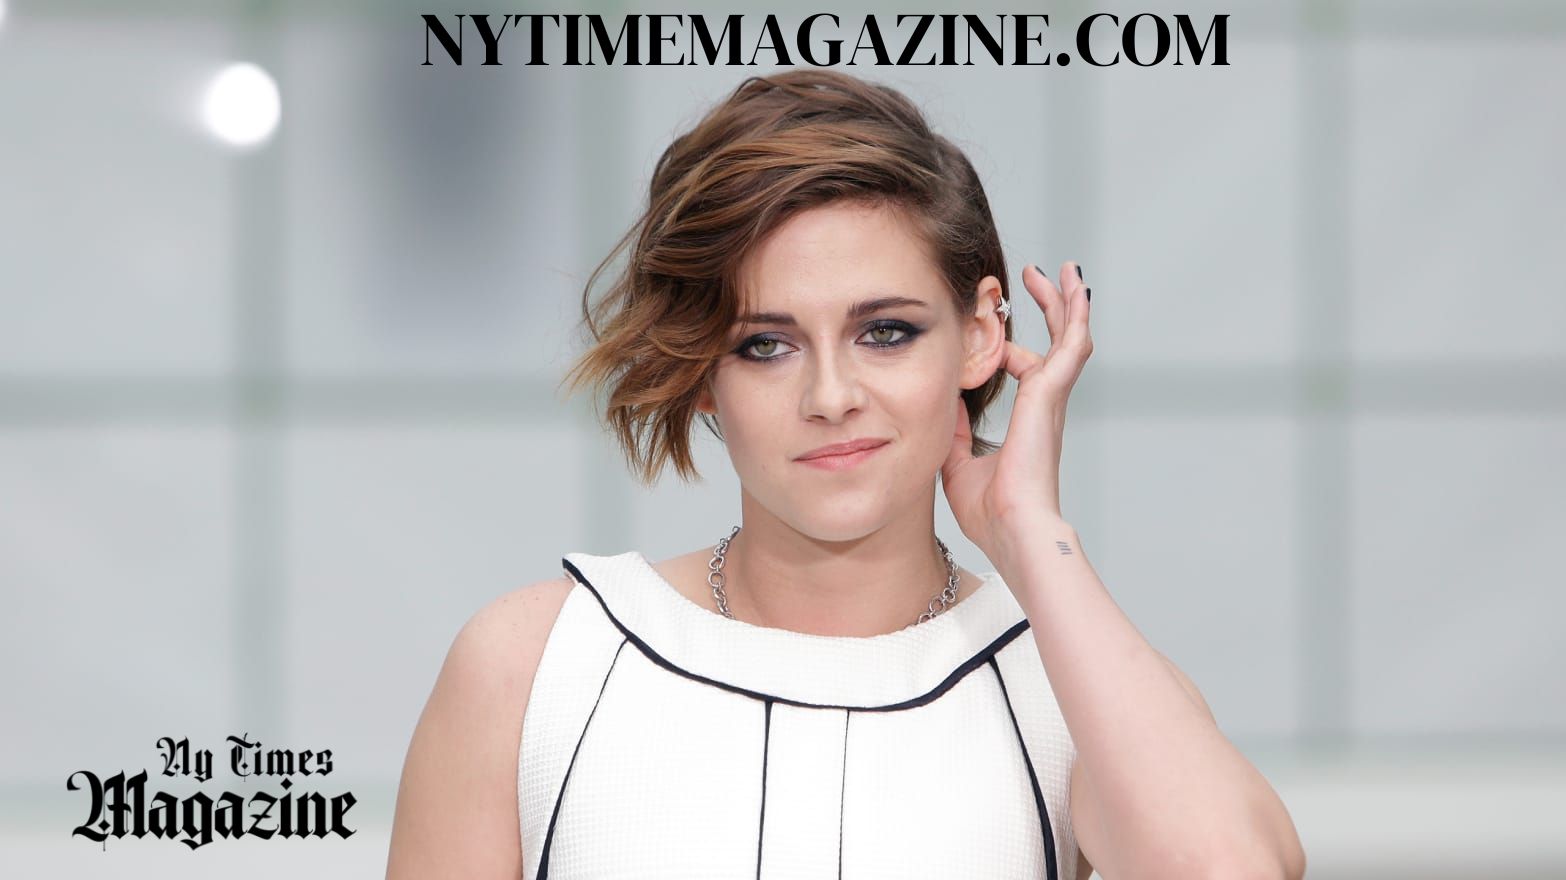 The Rise and Evolution of Kristen Stewart: From Twilight to Independent Cinema